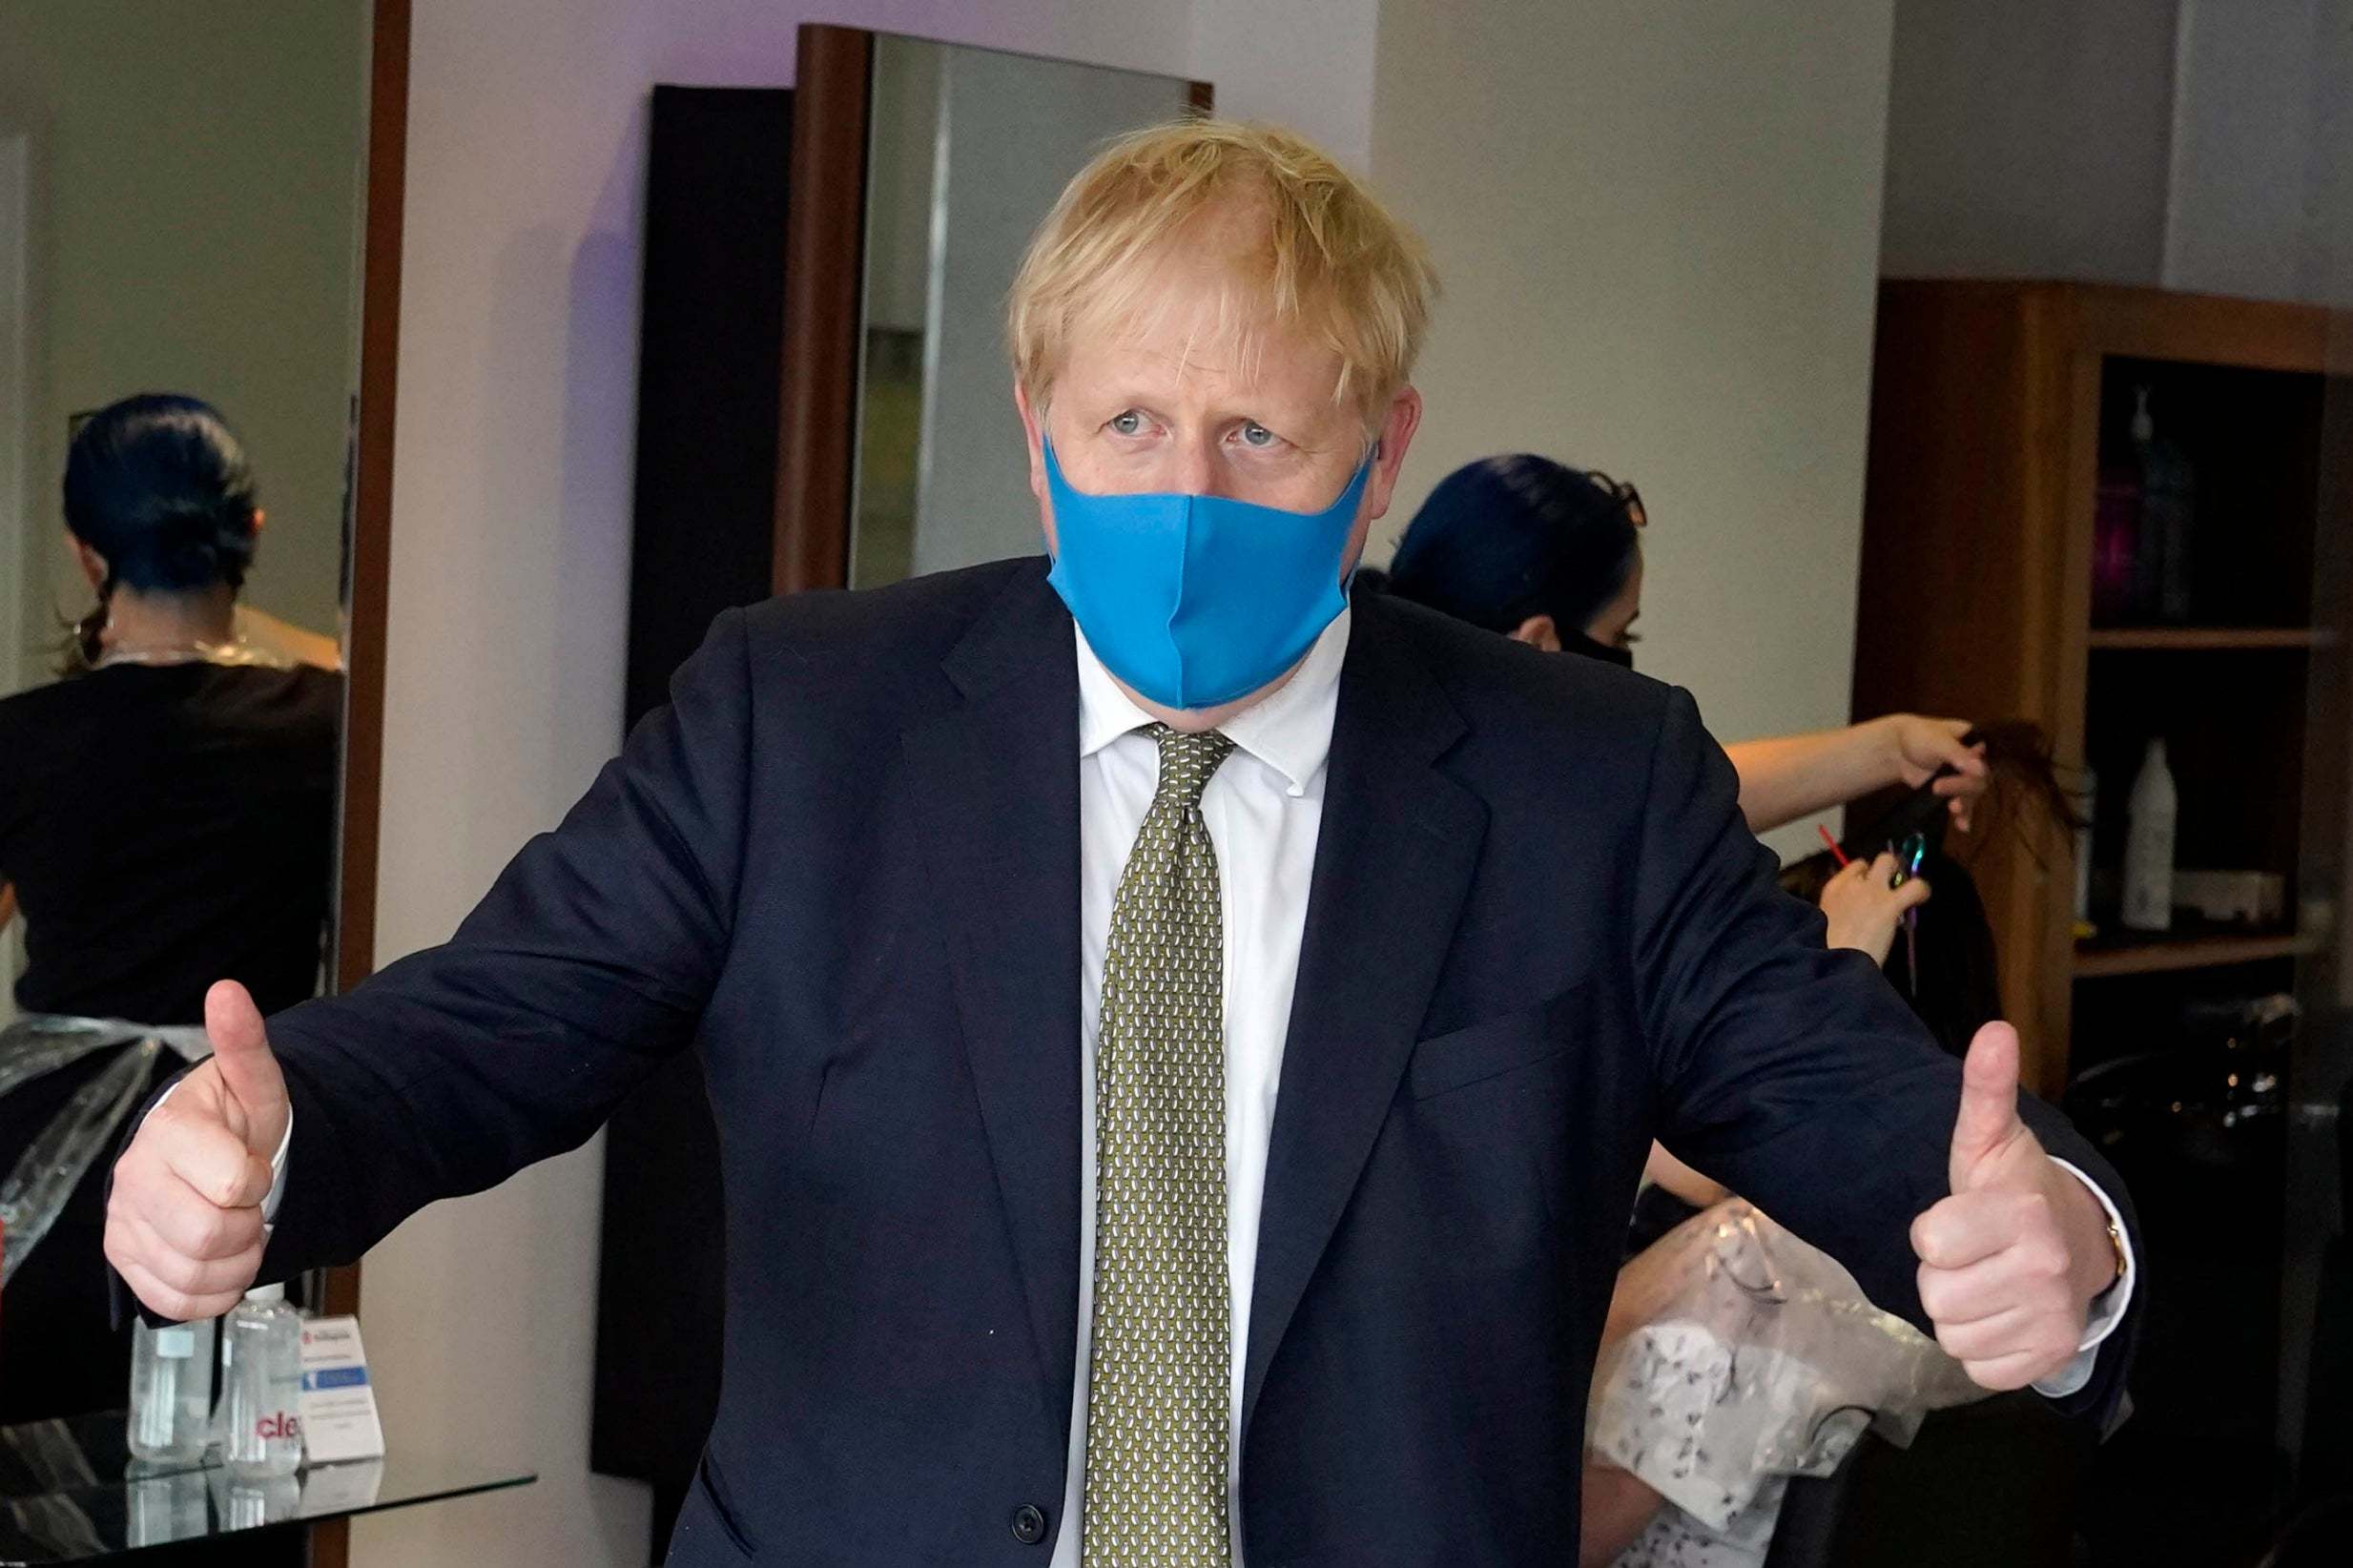 Boris Johnson was one of the last world leaders to be photographed wearing a mask in public